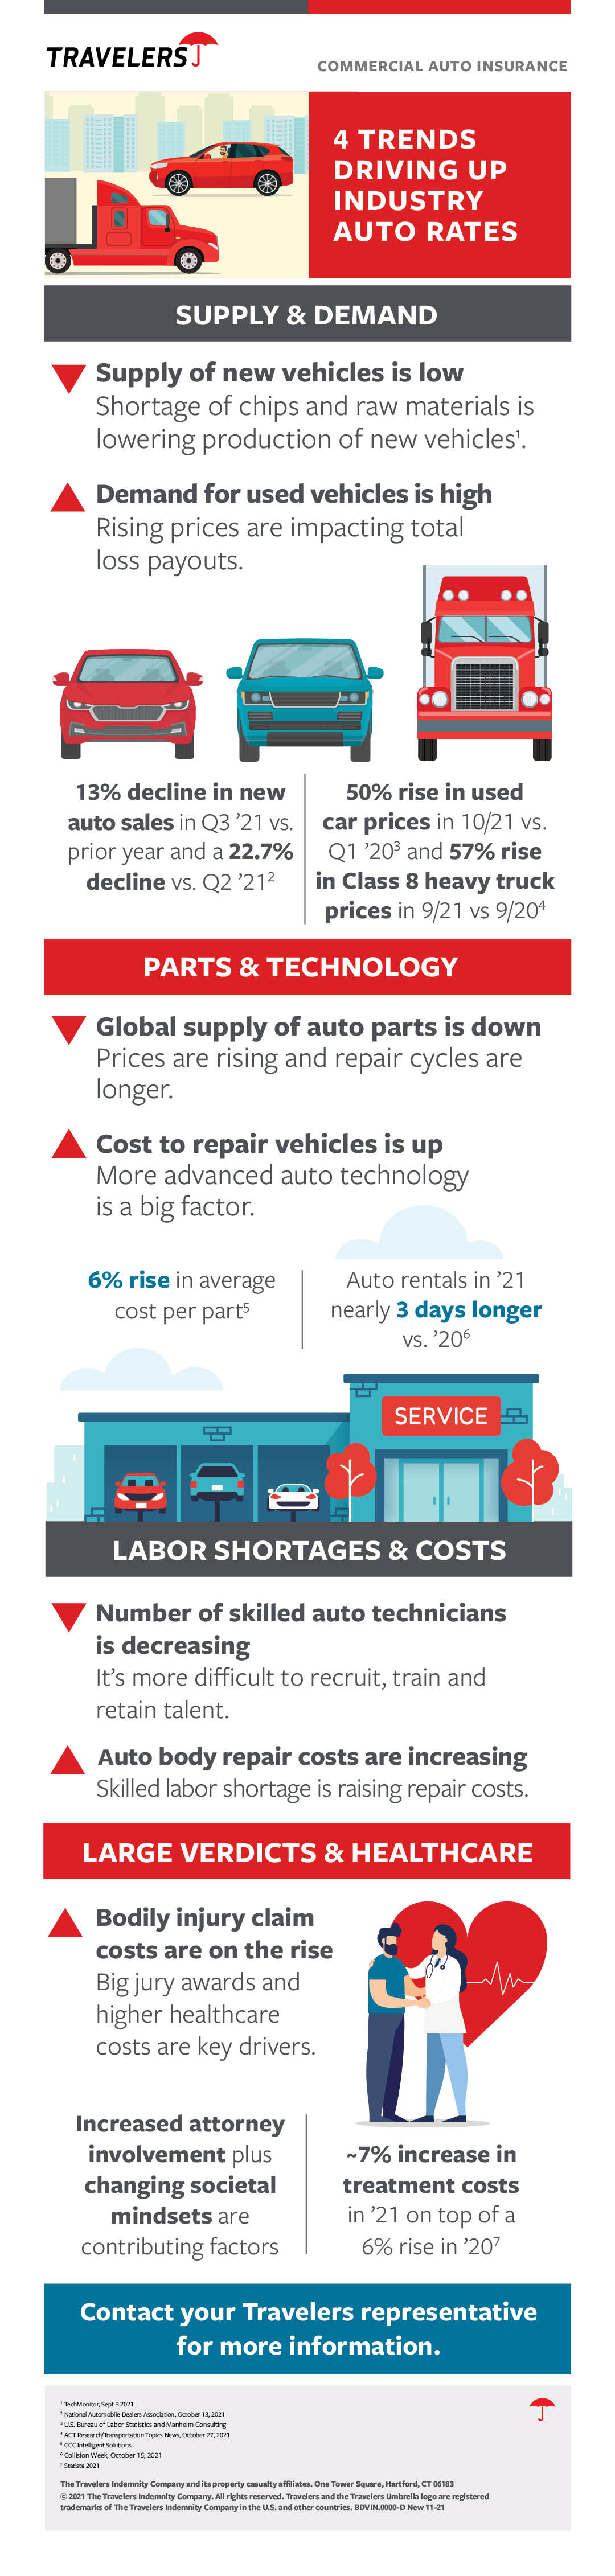 4 Trends Driving Up Industry Auto Rates Infographic, see details below